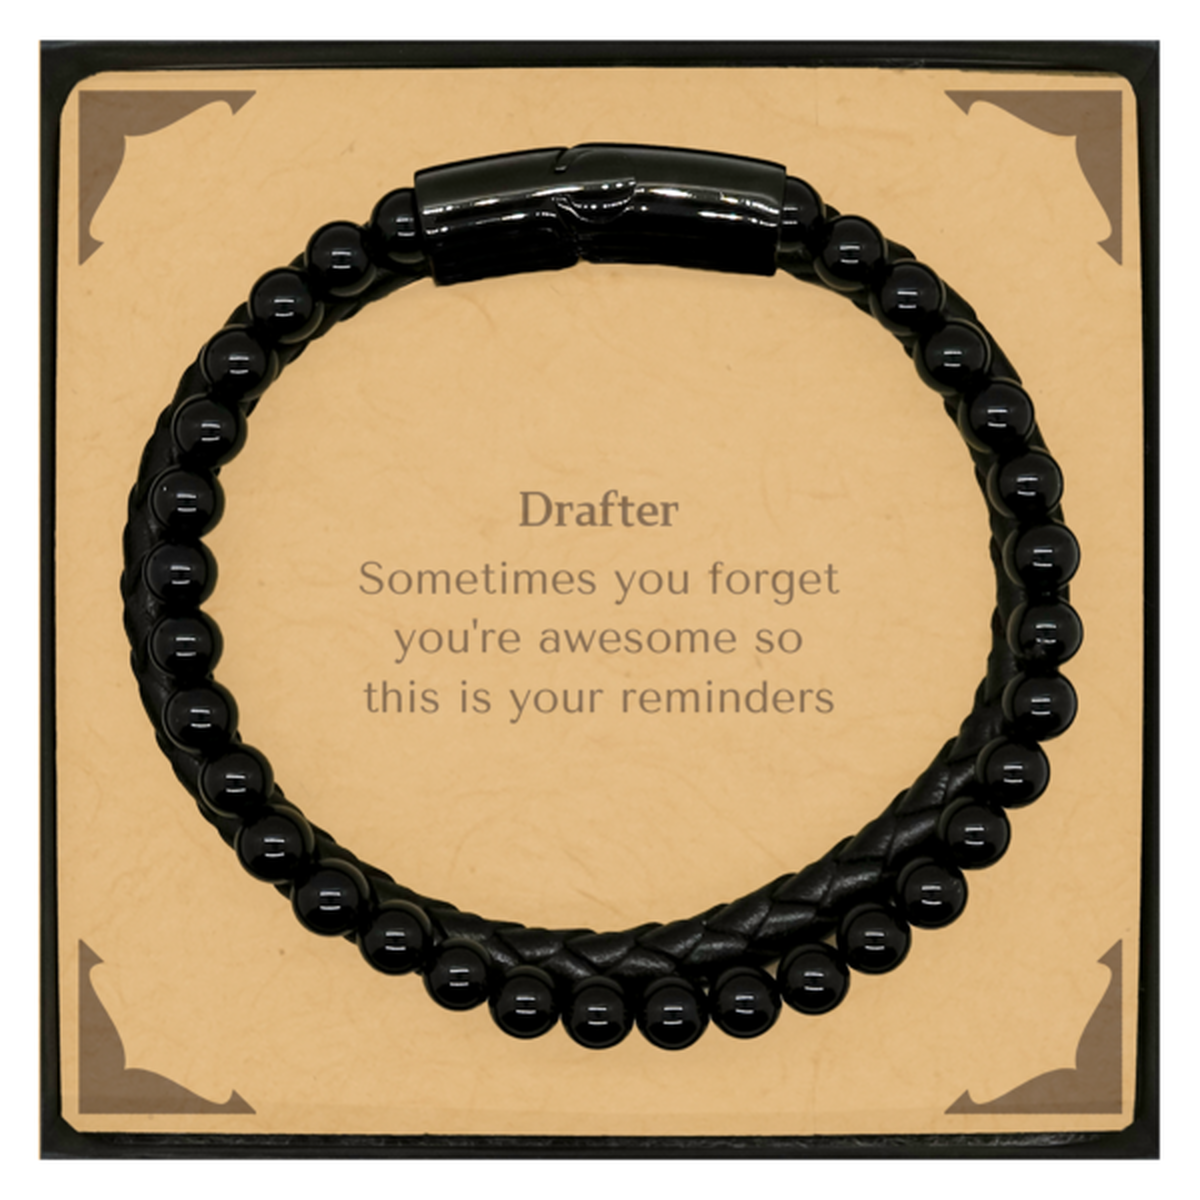 Sentimental Drafter Stone Leather Bracelets, Drafter Sometimes you forget you're awesome so this is your reminders, Graduation Christmas Birthday Gifts for Drafter, Men, Women, Coworkers